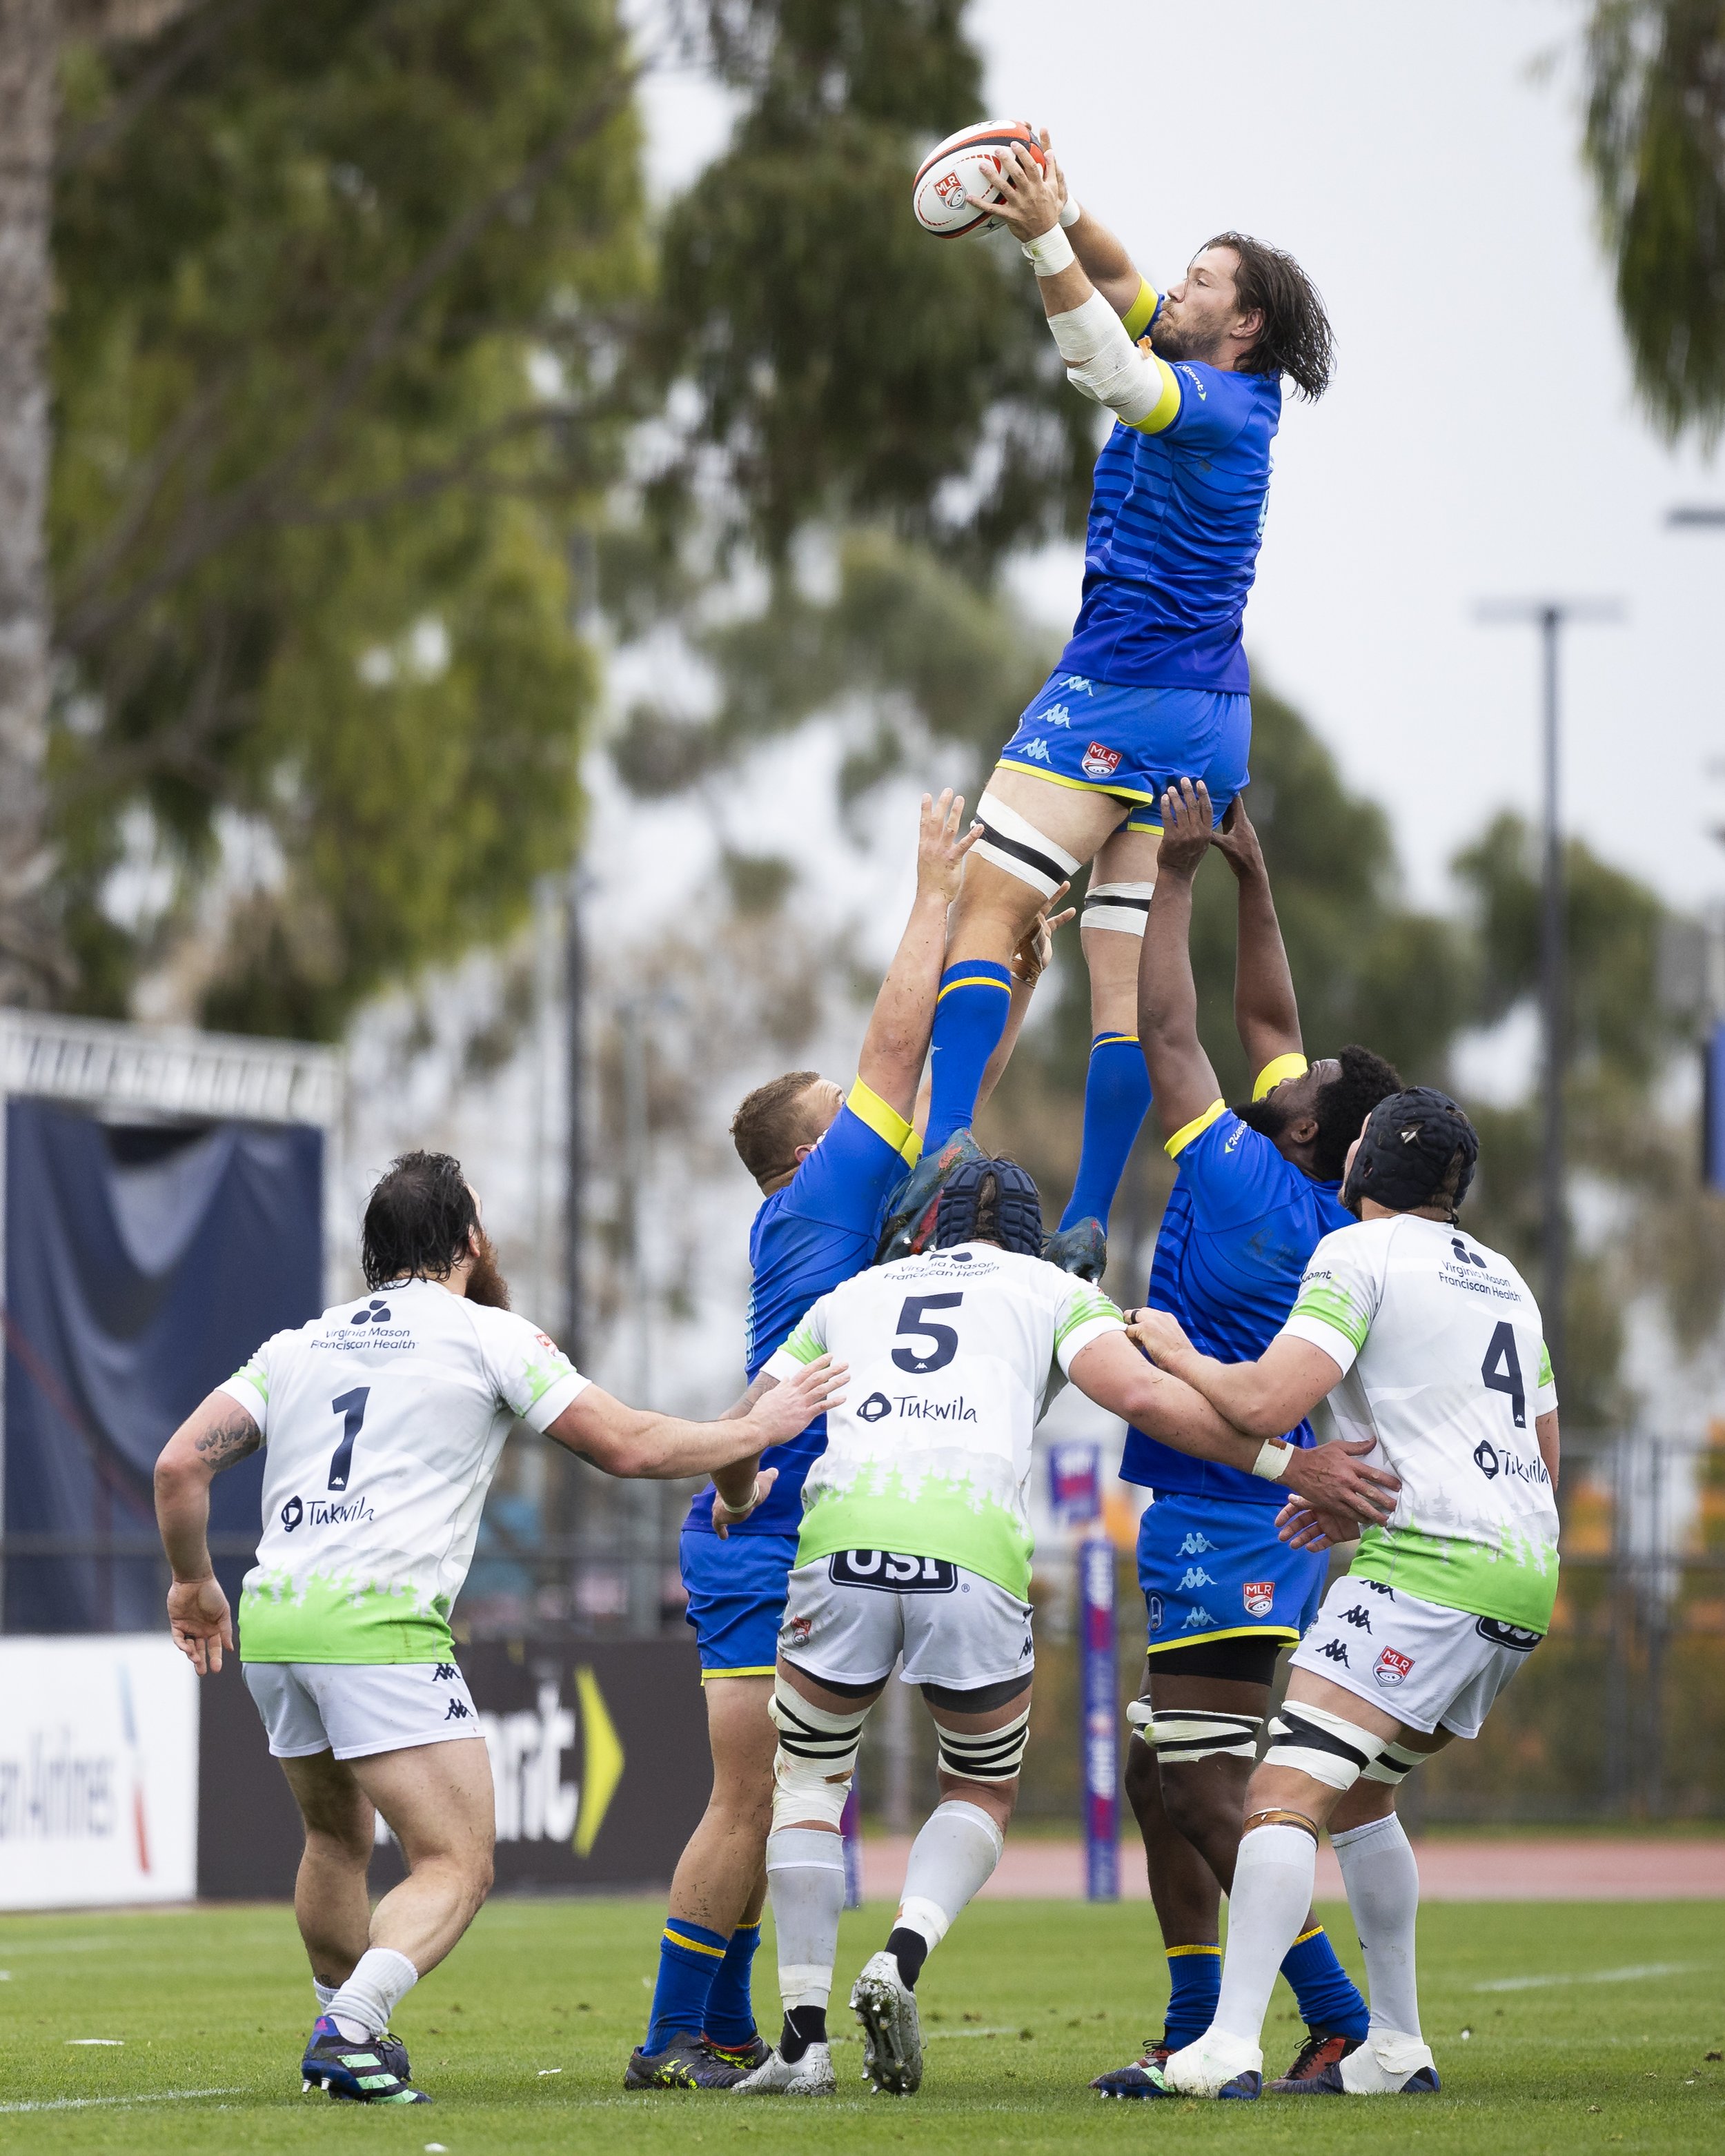  Rugby Football Club Los Angeles (RFCLA) flanker Jason Damm catches the ball during a line-out in the first half of a game at the Dignity Health Sports Park Track & Field Stadium, in Carson, Calif., on Sunday, April 15, 2023. The Seattle Seawolves wo